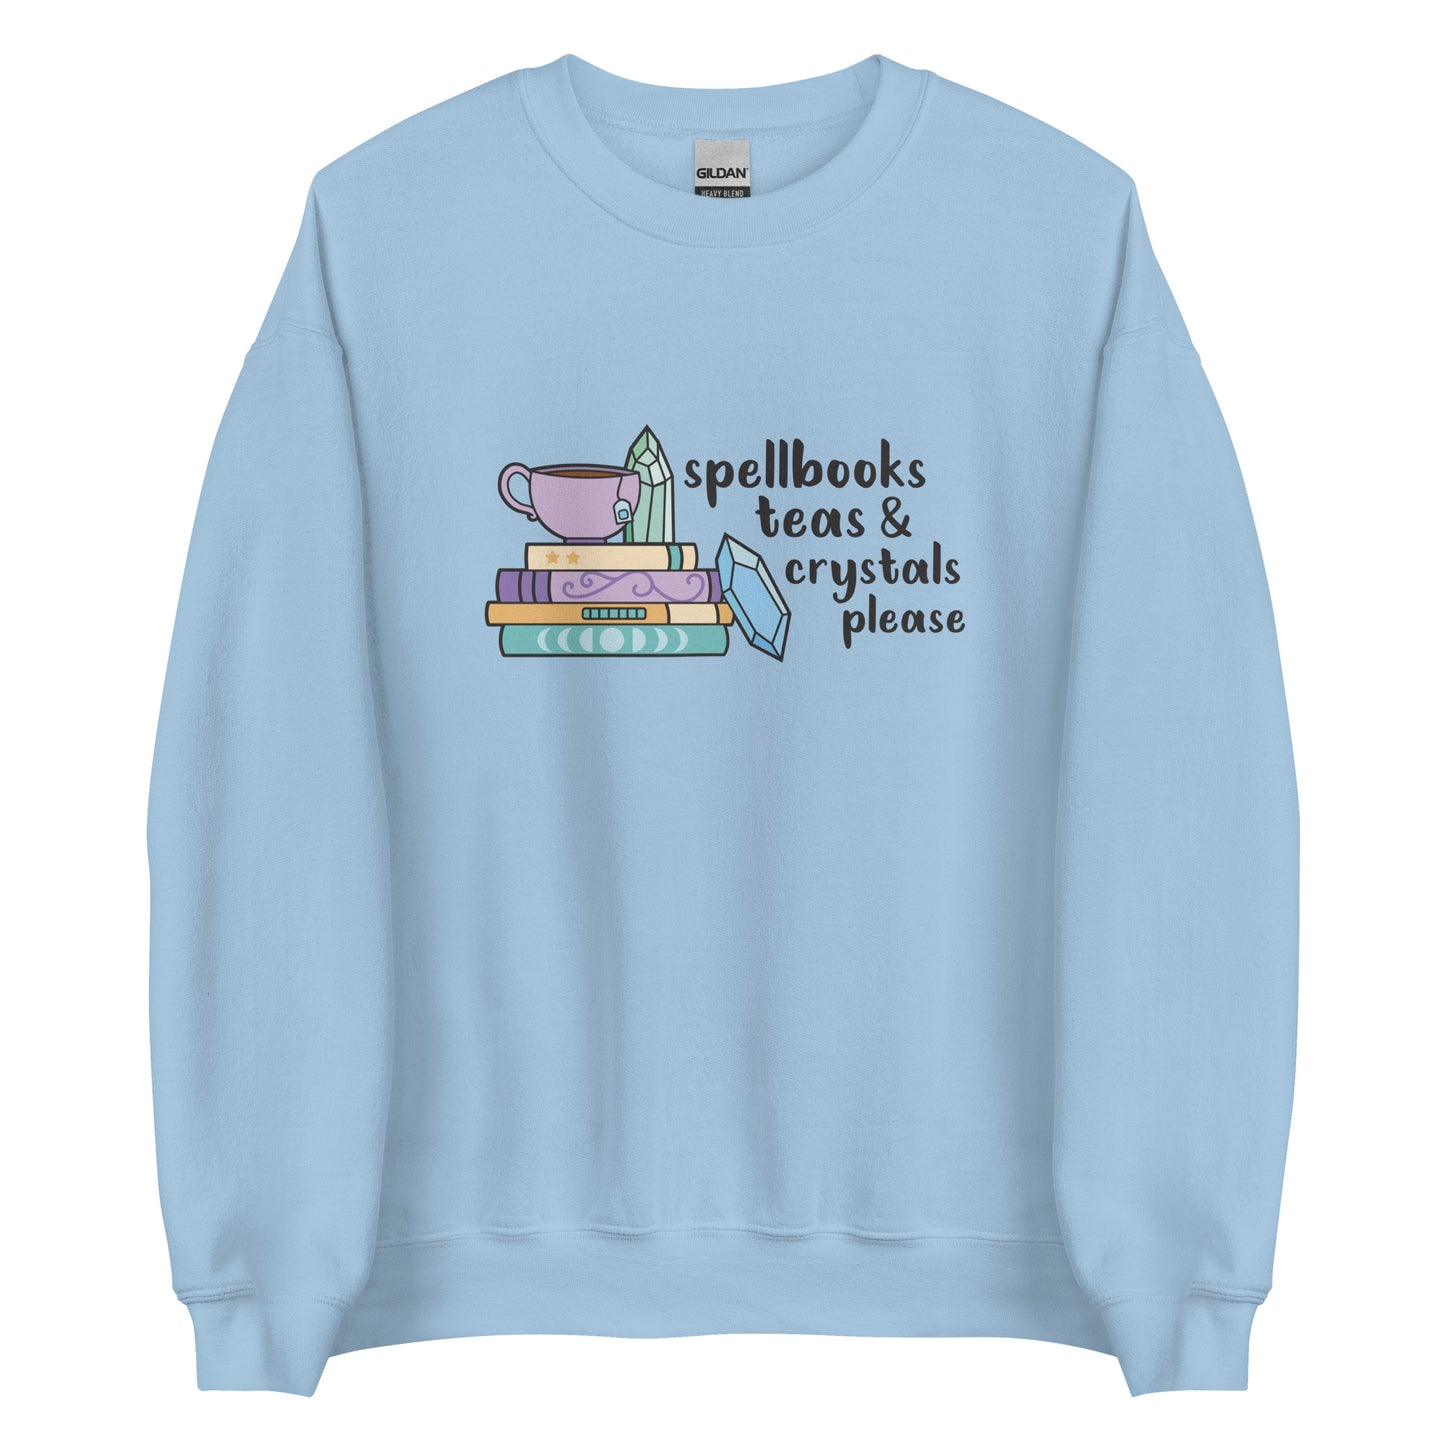 A light blue crewneck sweatshirt featuring an illustration of a stack of spellbooks with a teacup and a crystal resting on top. Another crystal rests on the side of the stack, and text next to the illustration reads "Spellbooks, teas & crystals please"